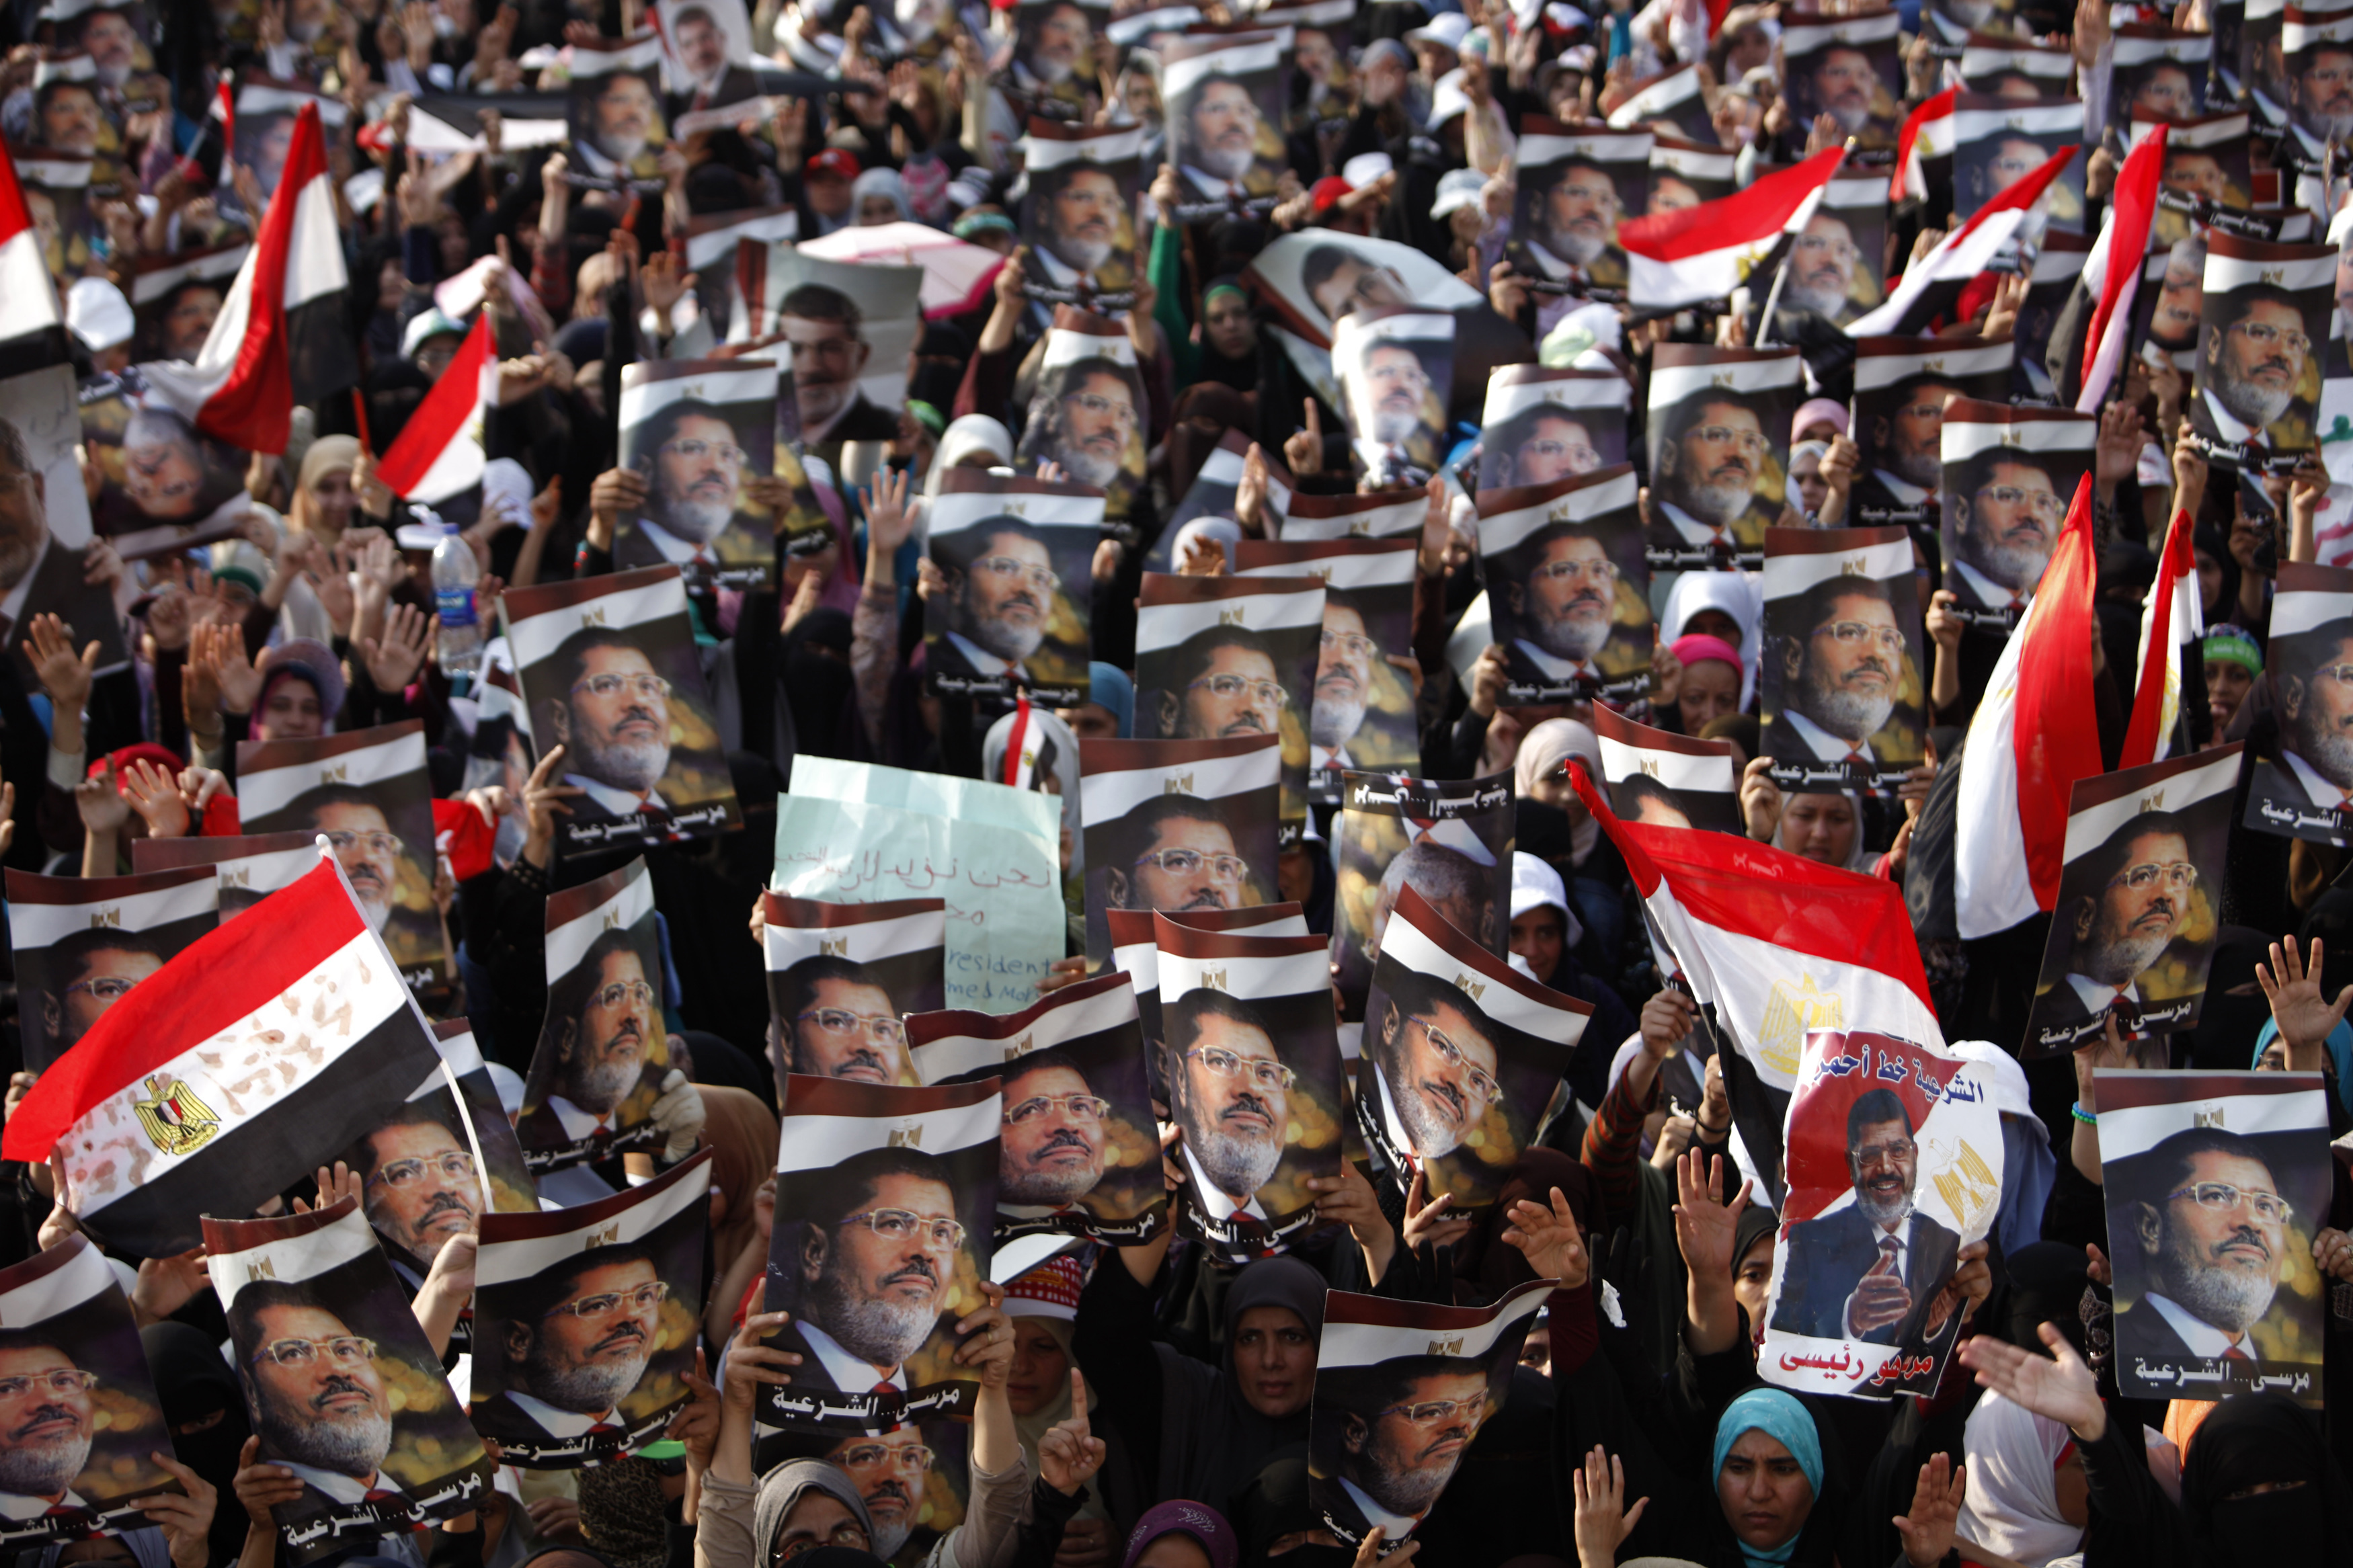 Morsi supporters hold his posters as they rally at the Rabaa Adawia square where they are camping, in Cairo on 8 July 2013